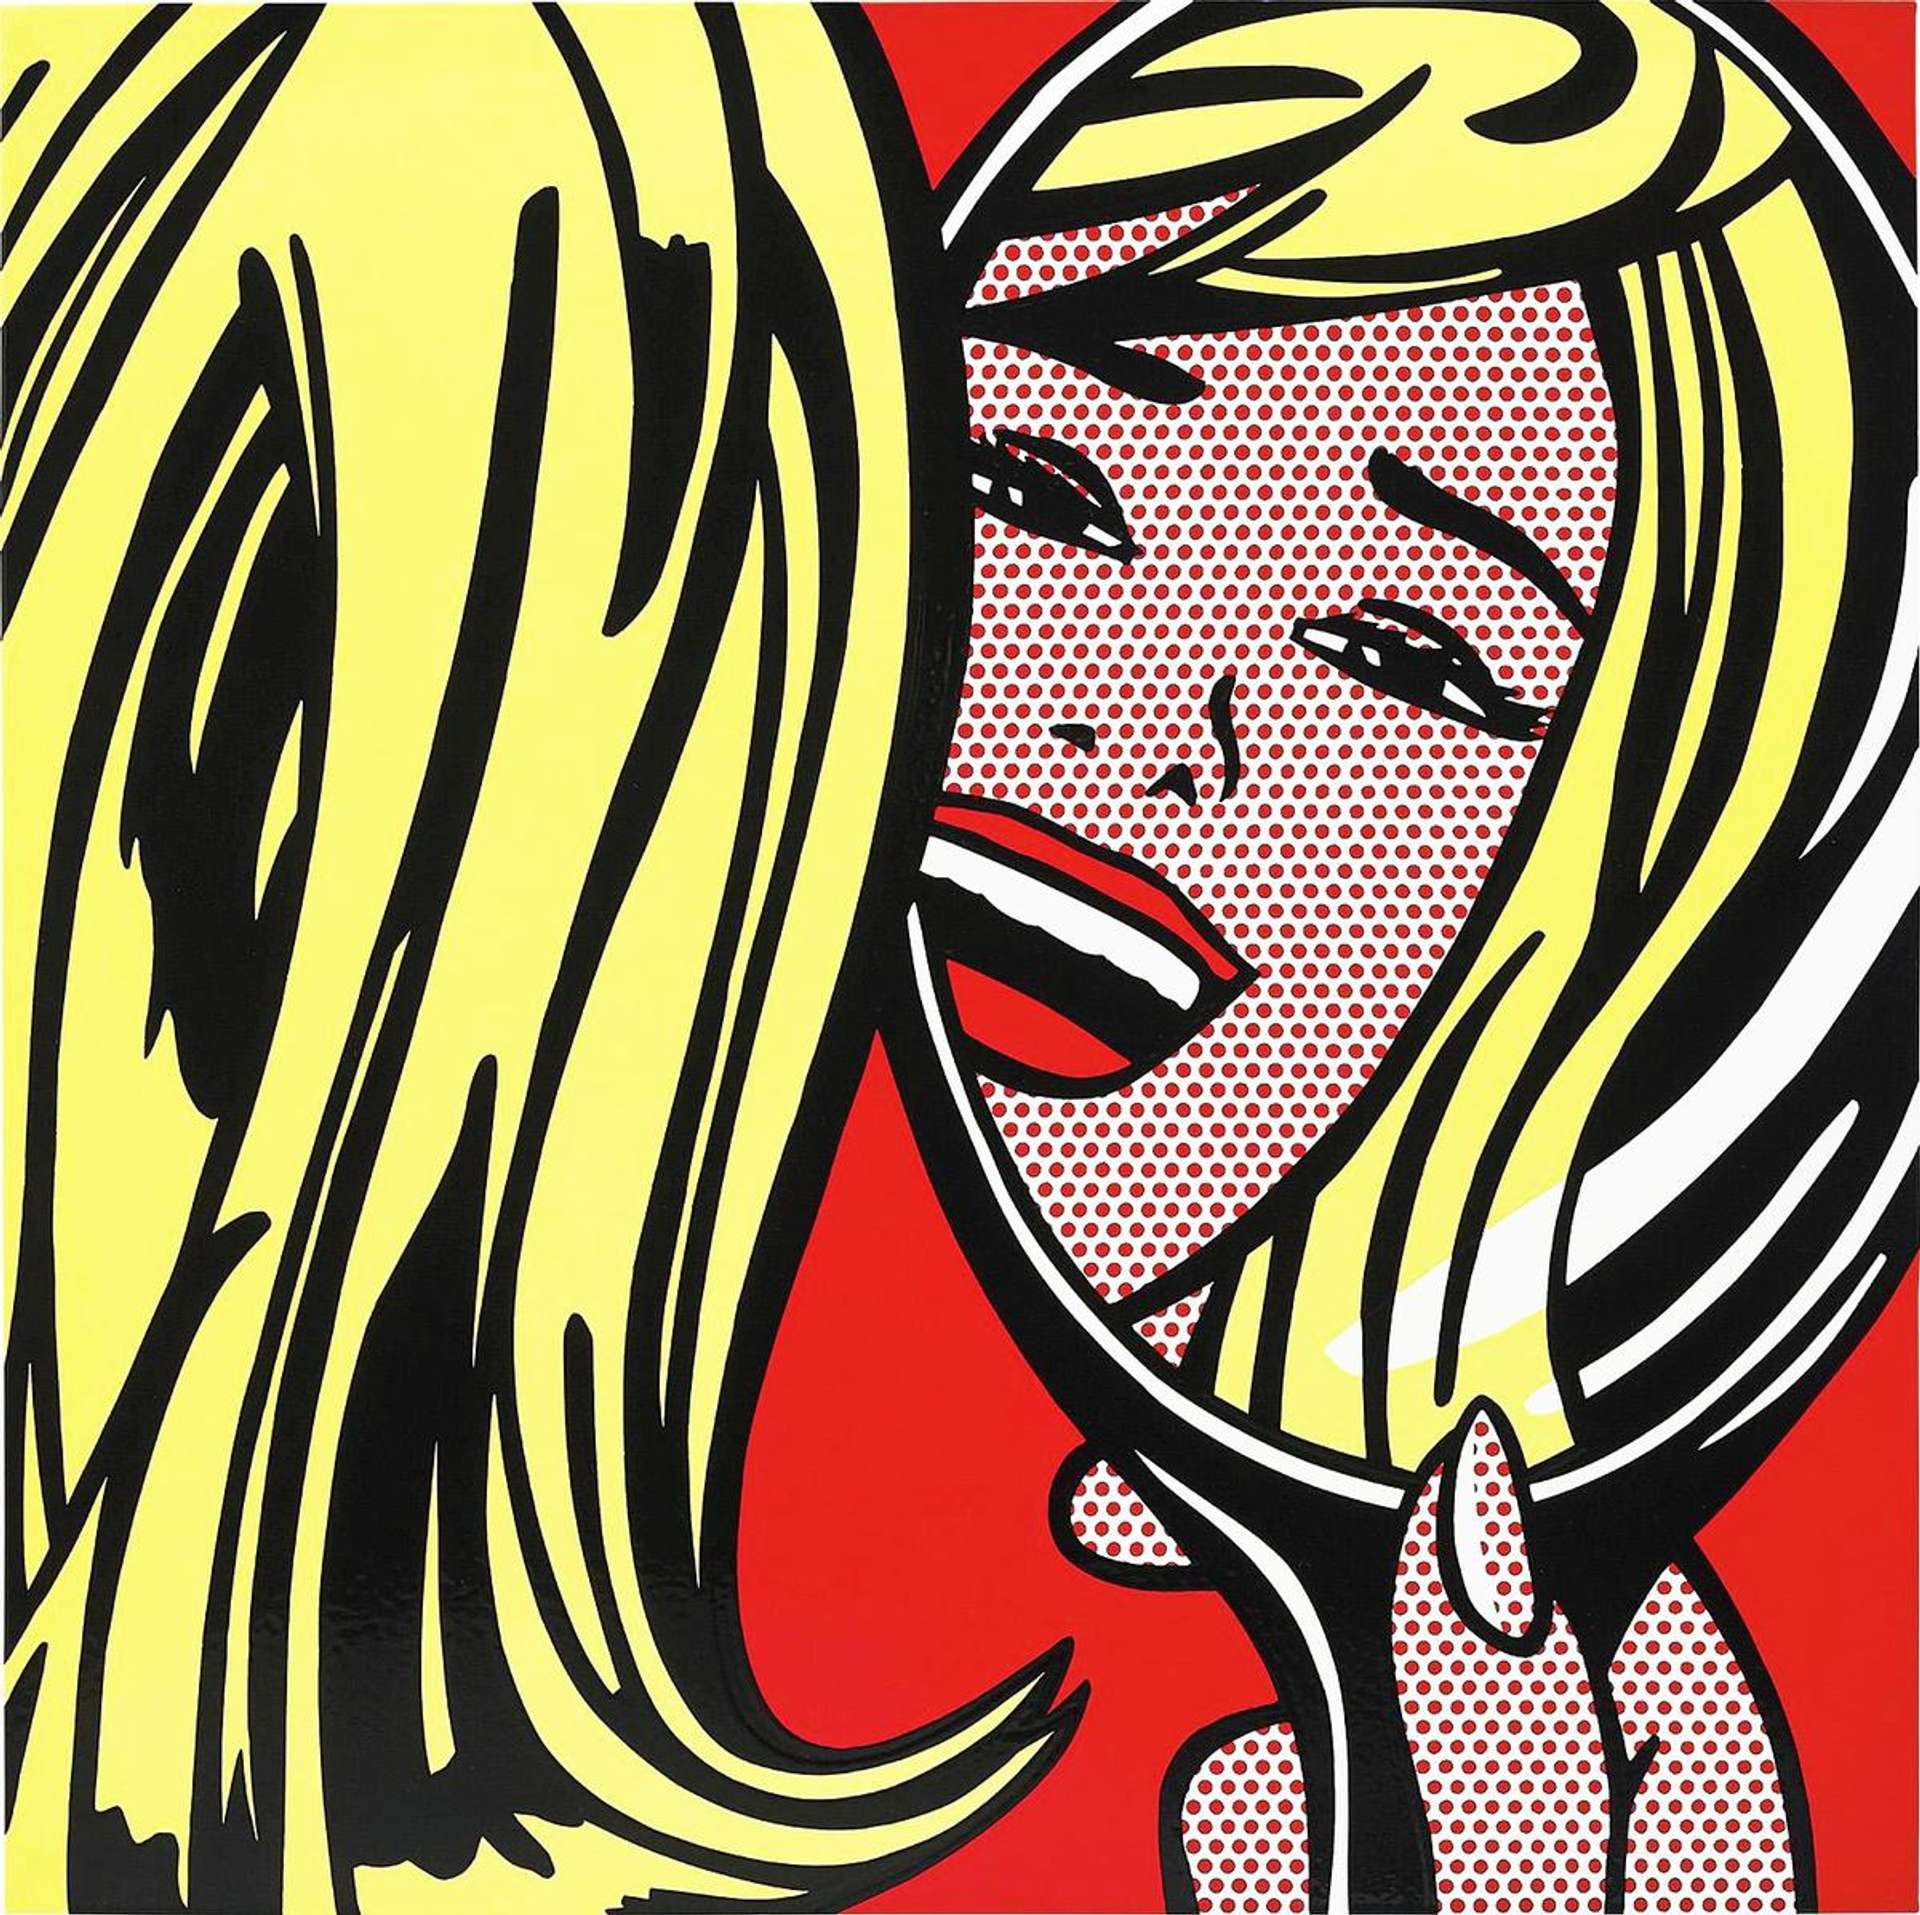 Roy Litchenstein’s Girl In Mirror. A Pop Art enamel print of a comic style graphic of a woman looking at her reflection in a handheld mirror laughing.